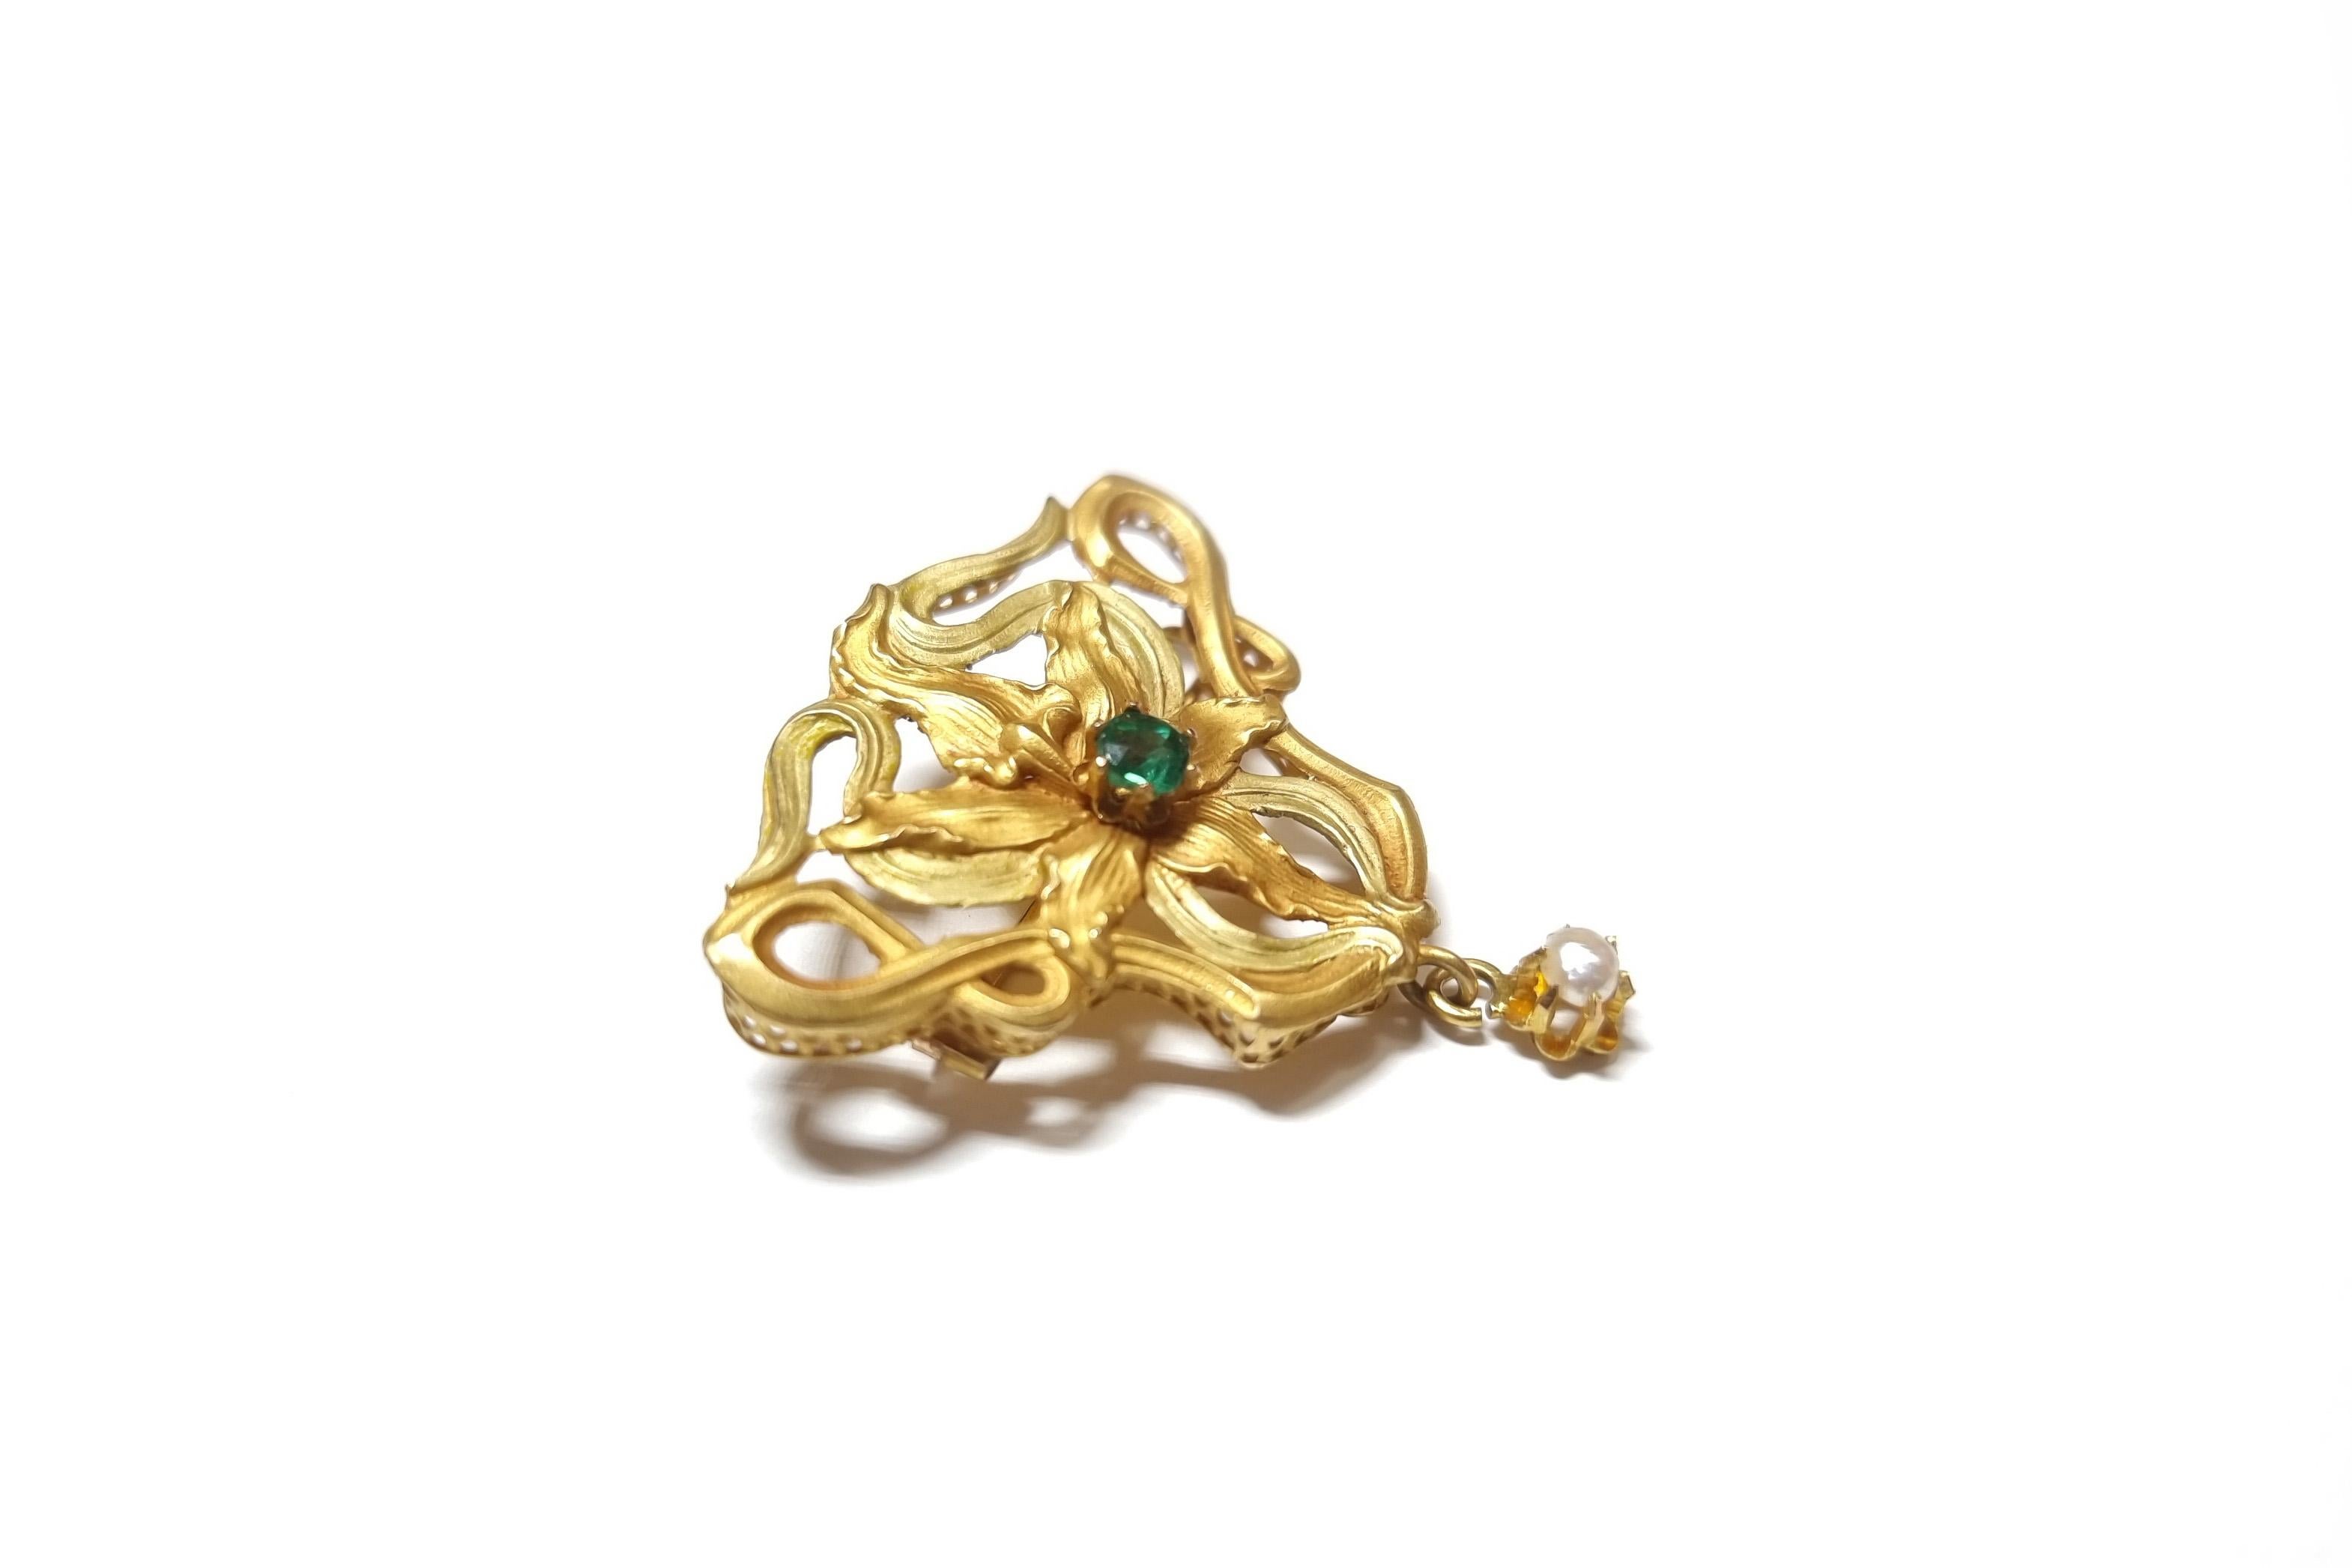 Art Nouveau orchid brooch in 18 karats matte gold, yellow and green colors, with a triangular shape and decorated with an orchid flower in full bloom centered with a green stone (garnet /glass doublet), surrounded by 